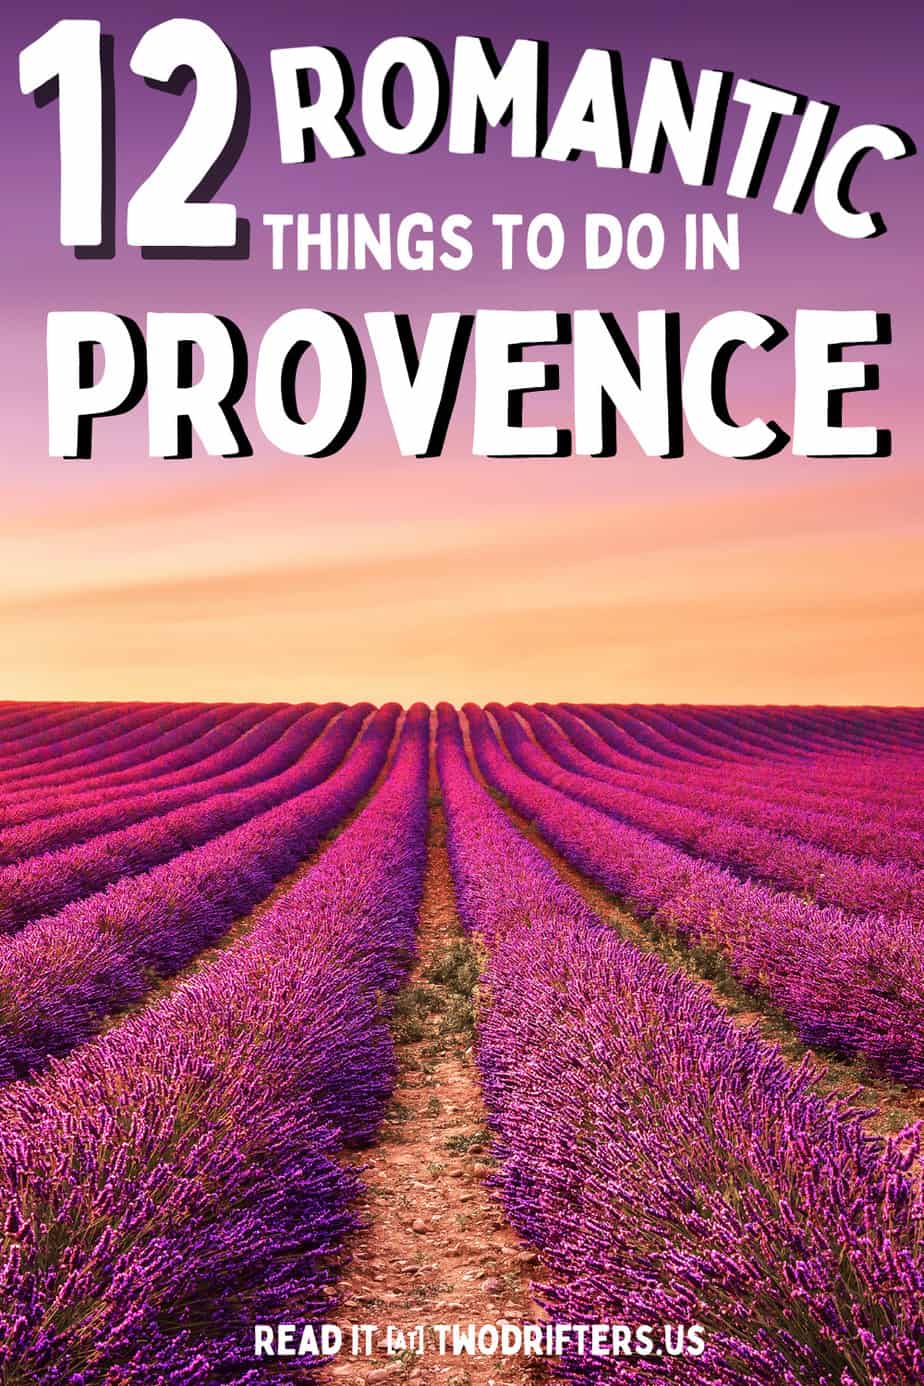 Pinterest social share image that says "12 Romantic things to do in Provence."